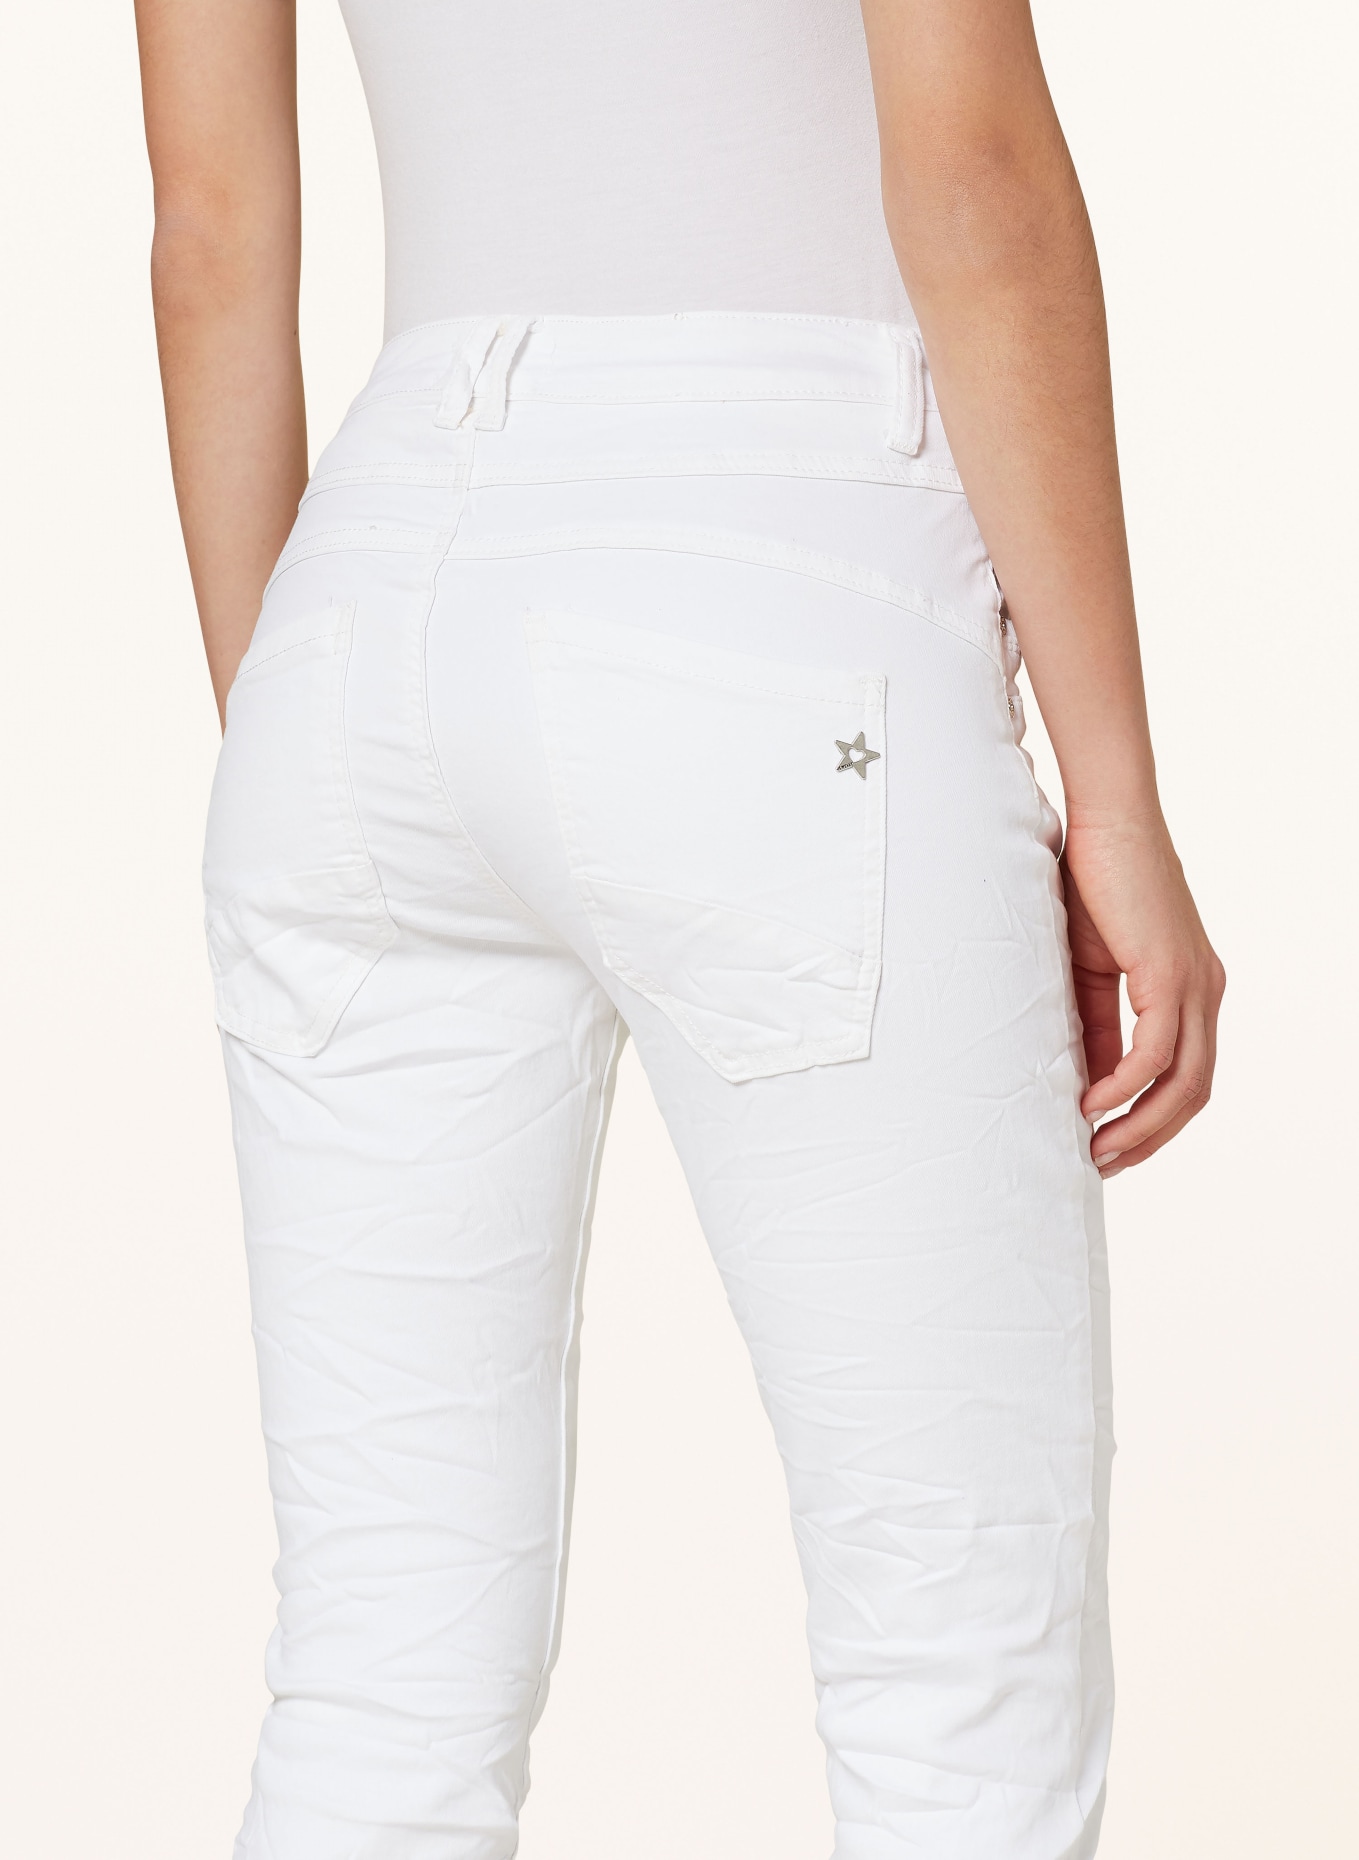 miss goodlife Skinny jeans, Color: WHITE (Image 5)